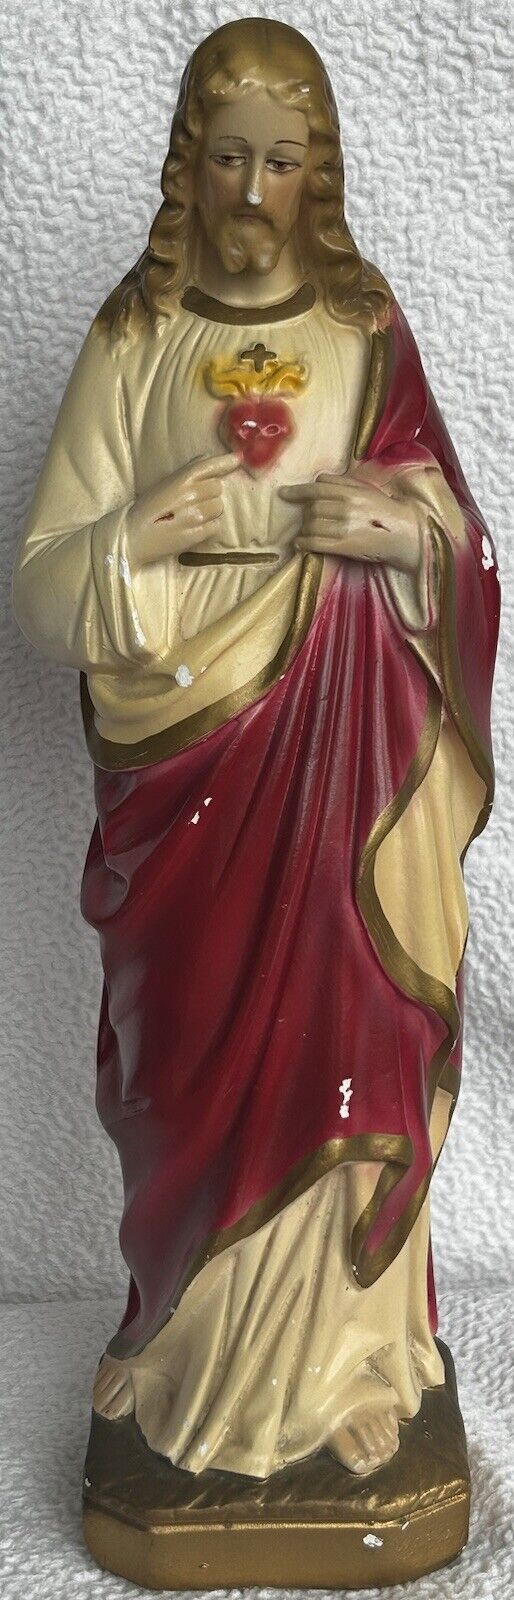 The Most Sacred Heart Of Jesus 880 Chalkware Figure 12 3/4” x 3 1/4” 1950s